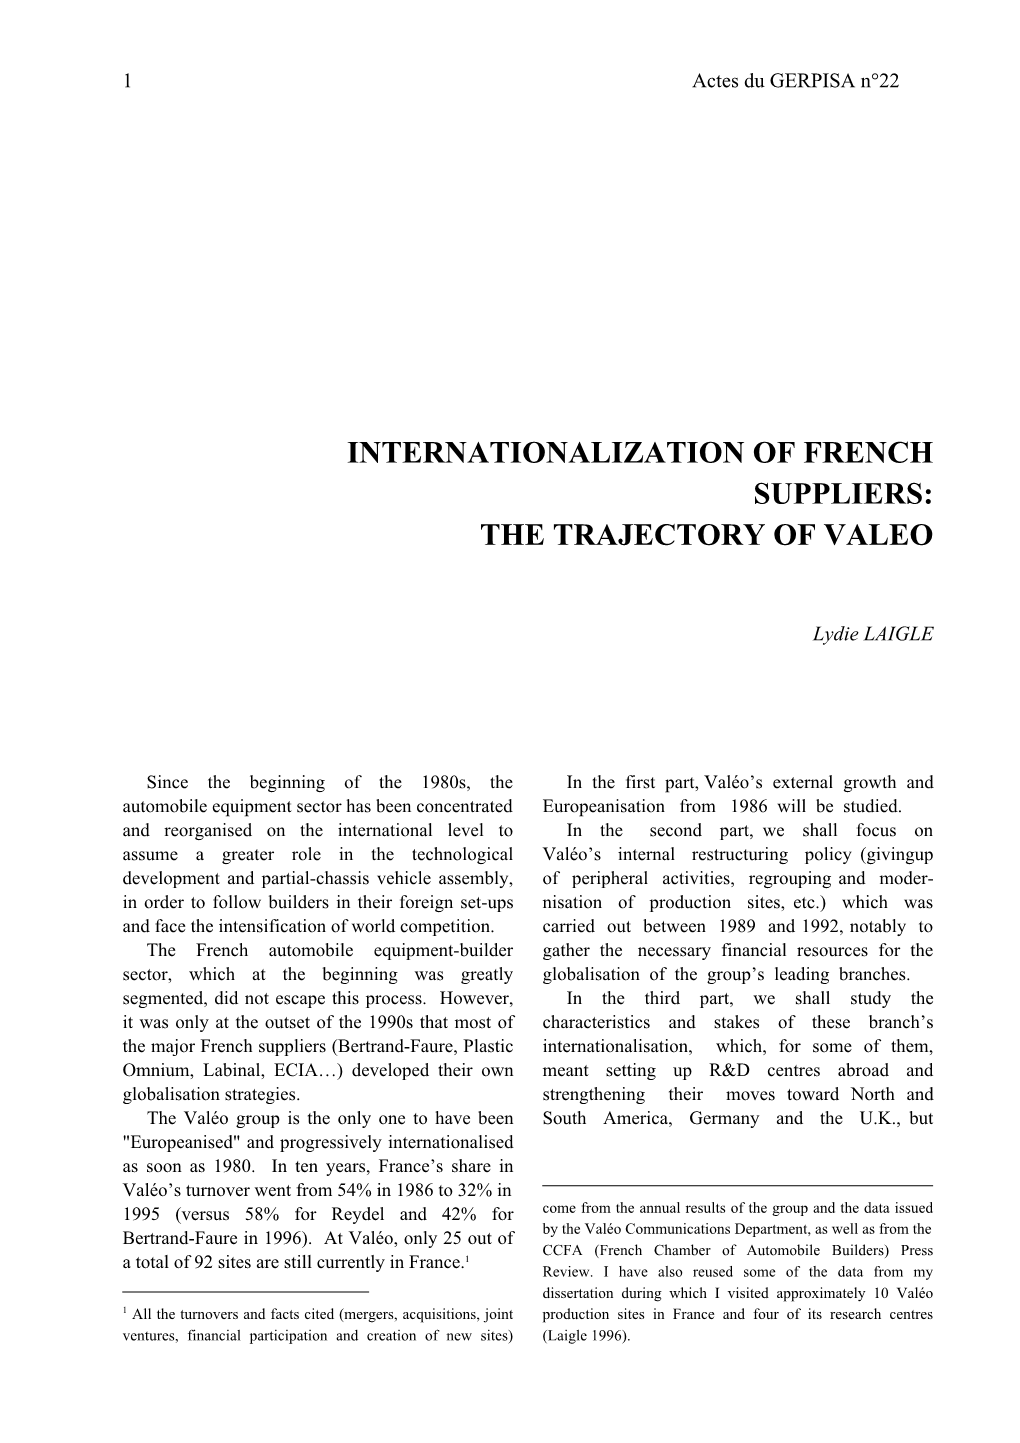 Internationalization of French Suppliers: the Trajectory of Valeo